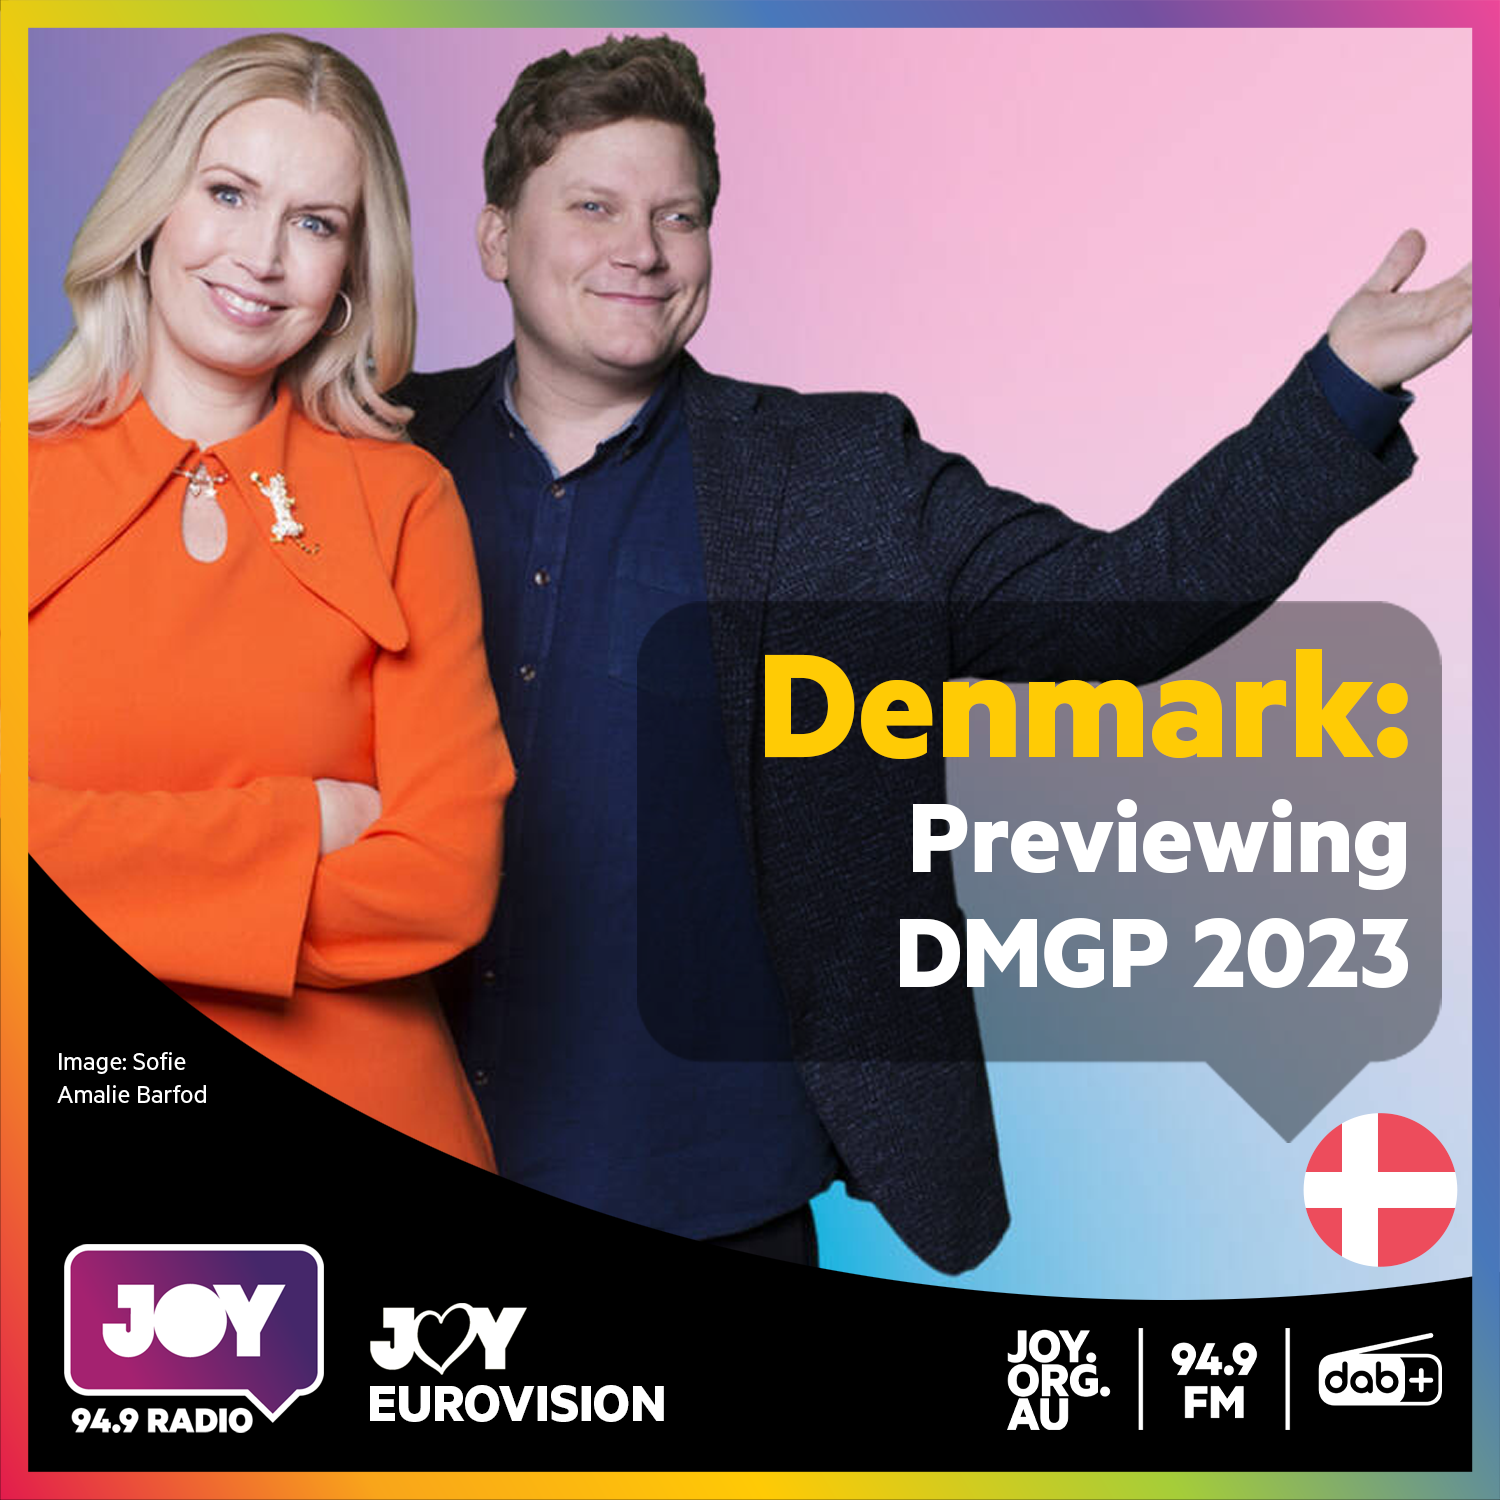 🇩🇰 Previewing Dansk Melodi Grand Prix 2023: Denmark’s putting on a show